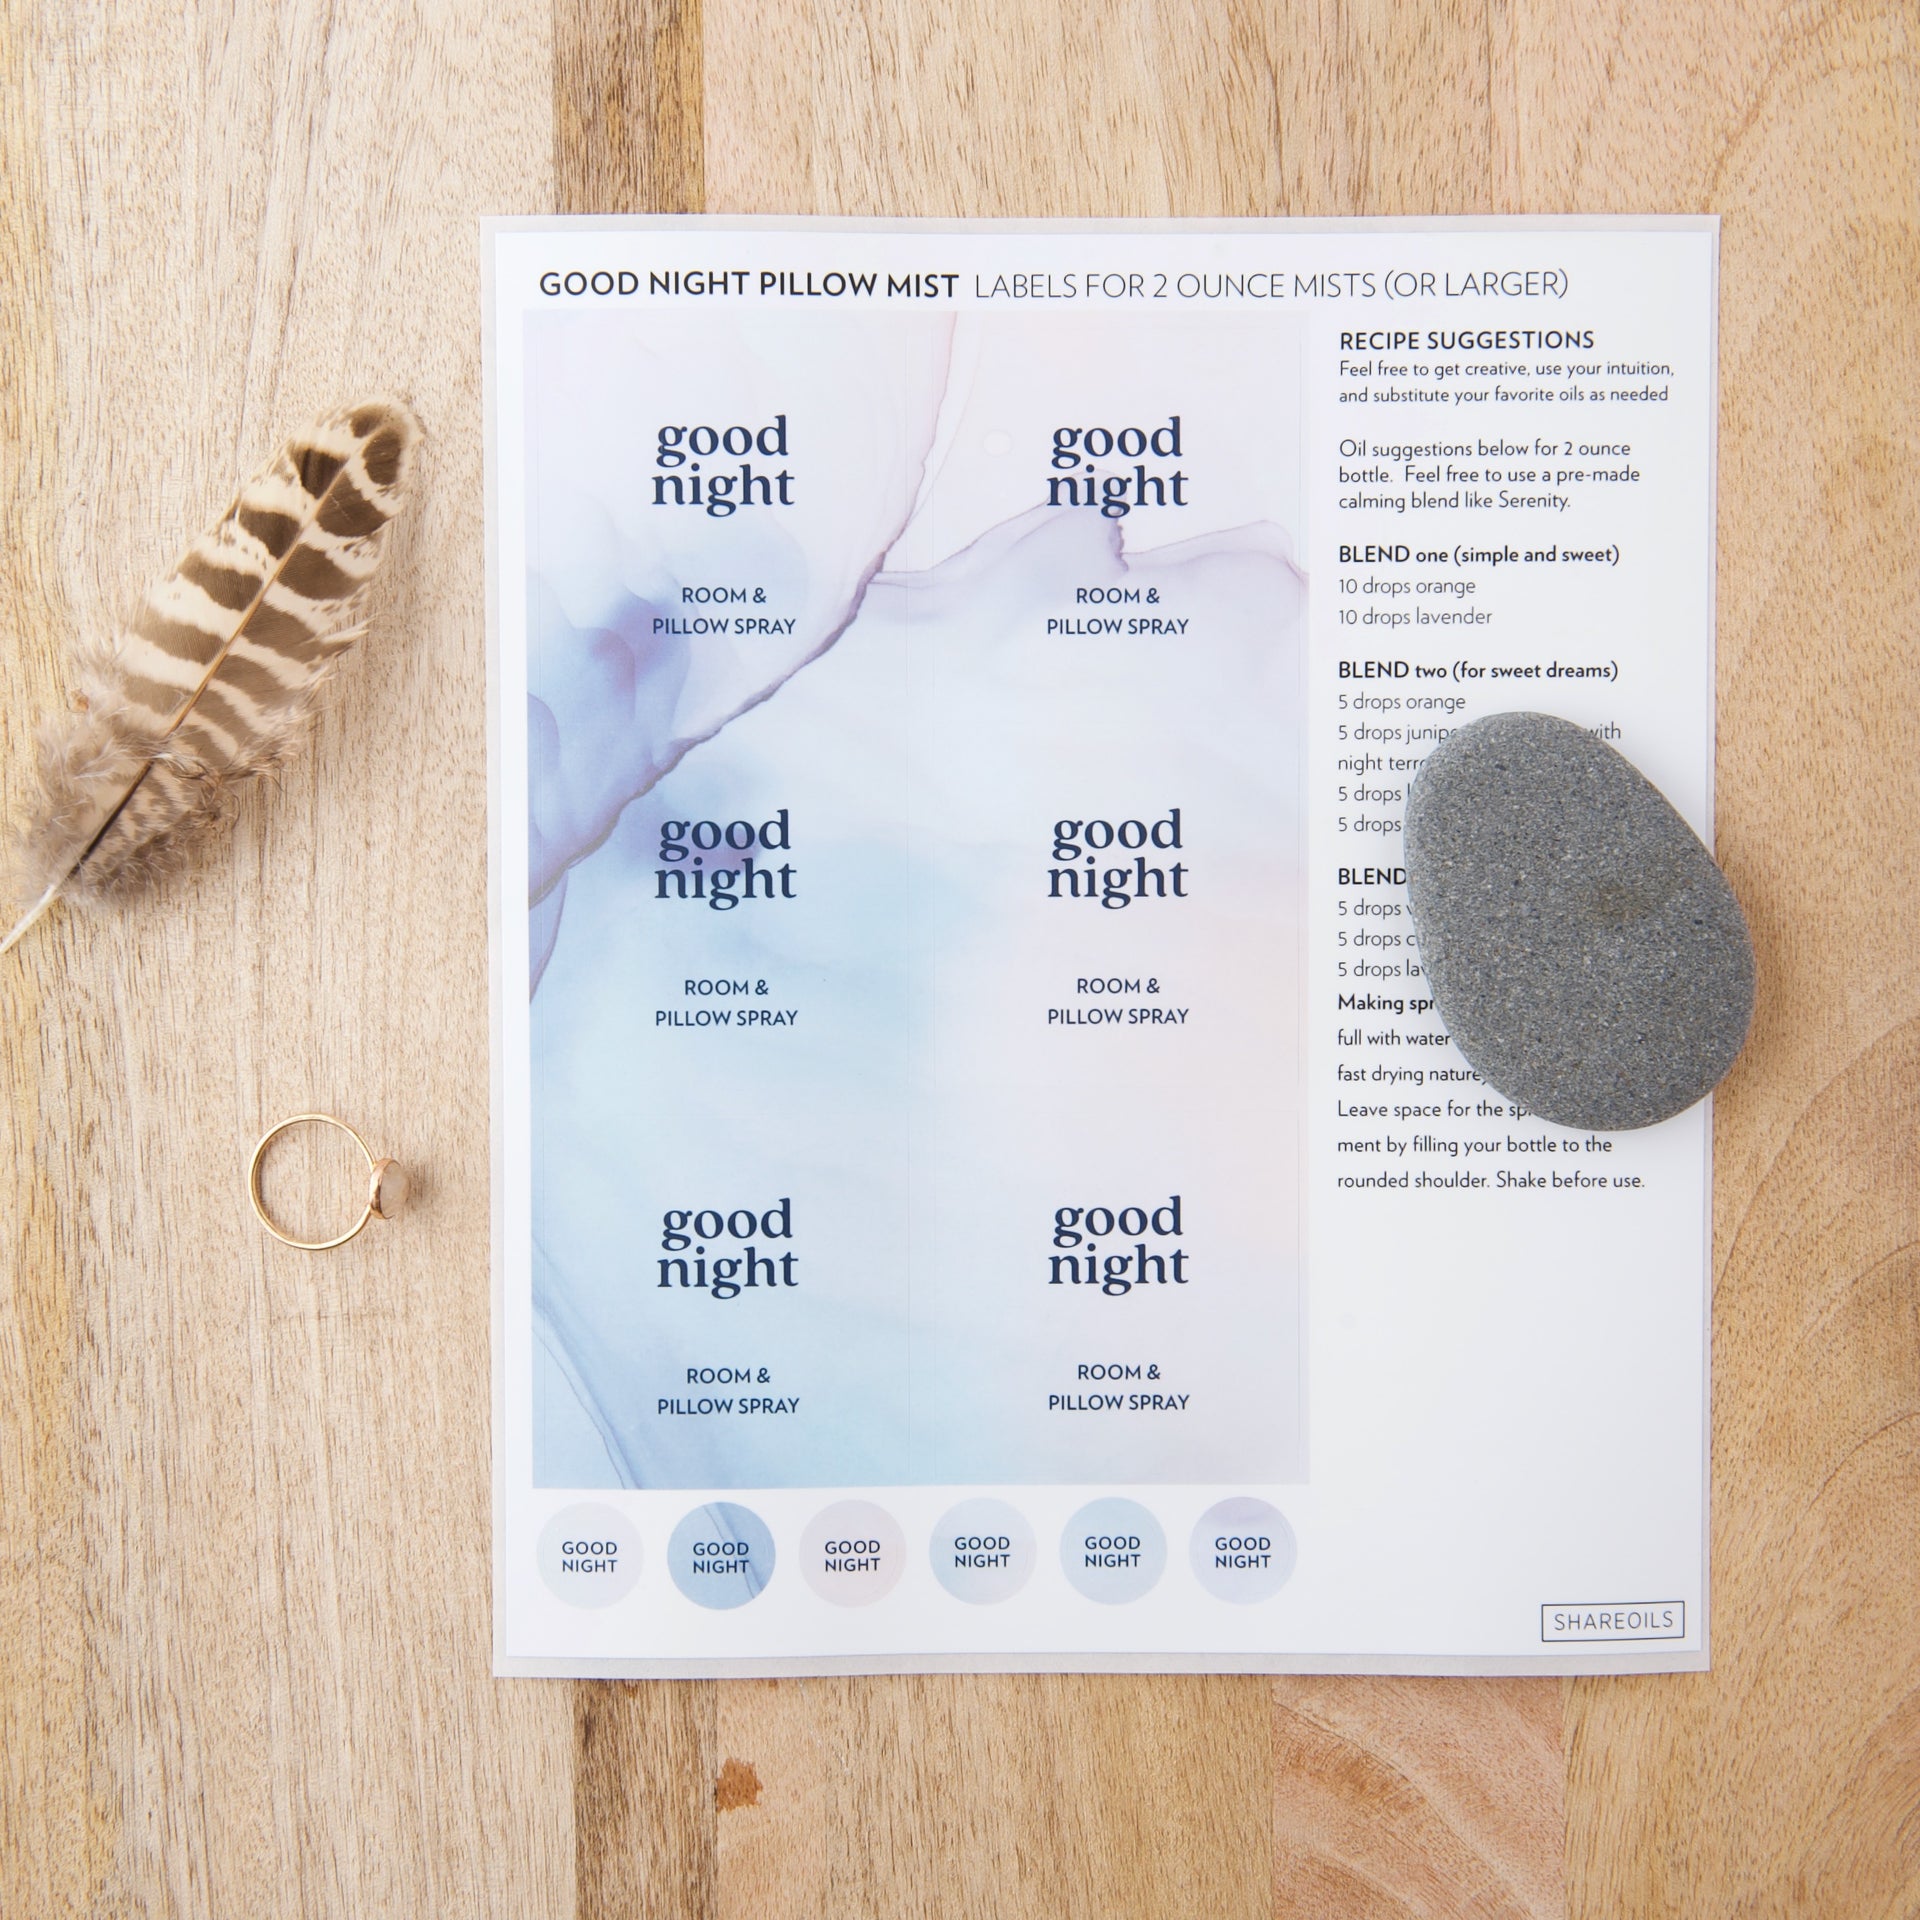 Good Night Pillow Mist Label + Recipes – Sheet of 6 Labels